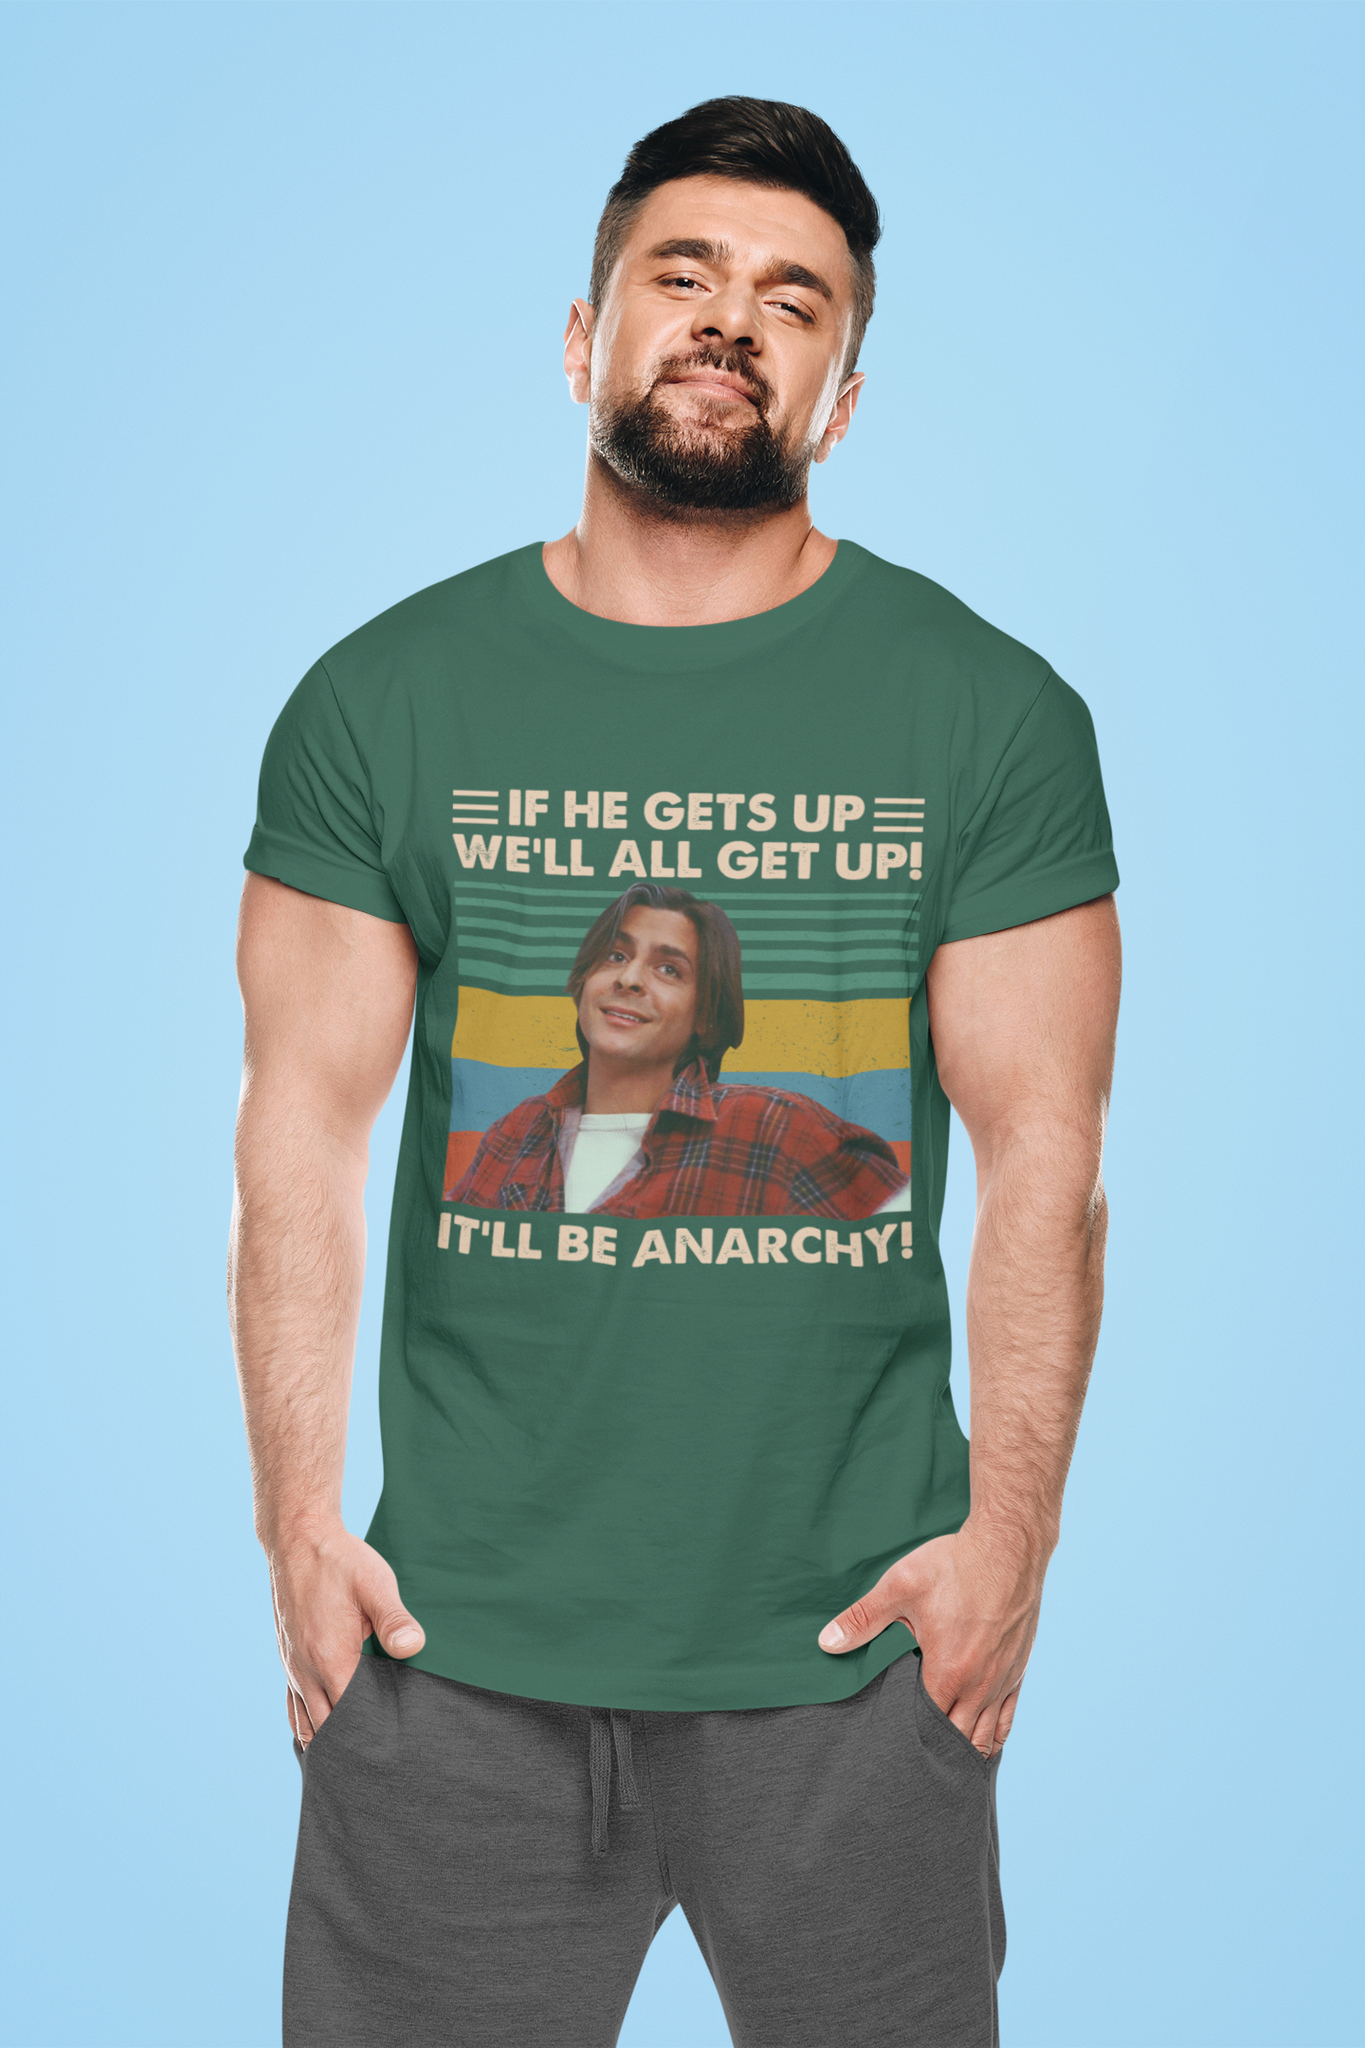 Breakfast Club Vintage T Shirt, John Bender Tshirt, If He Gets Up Well All Get Up Itll Be Anarchy T Shirt